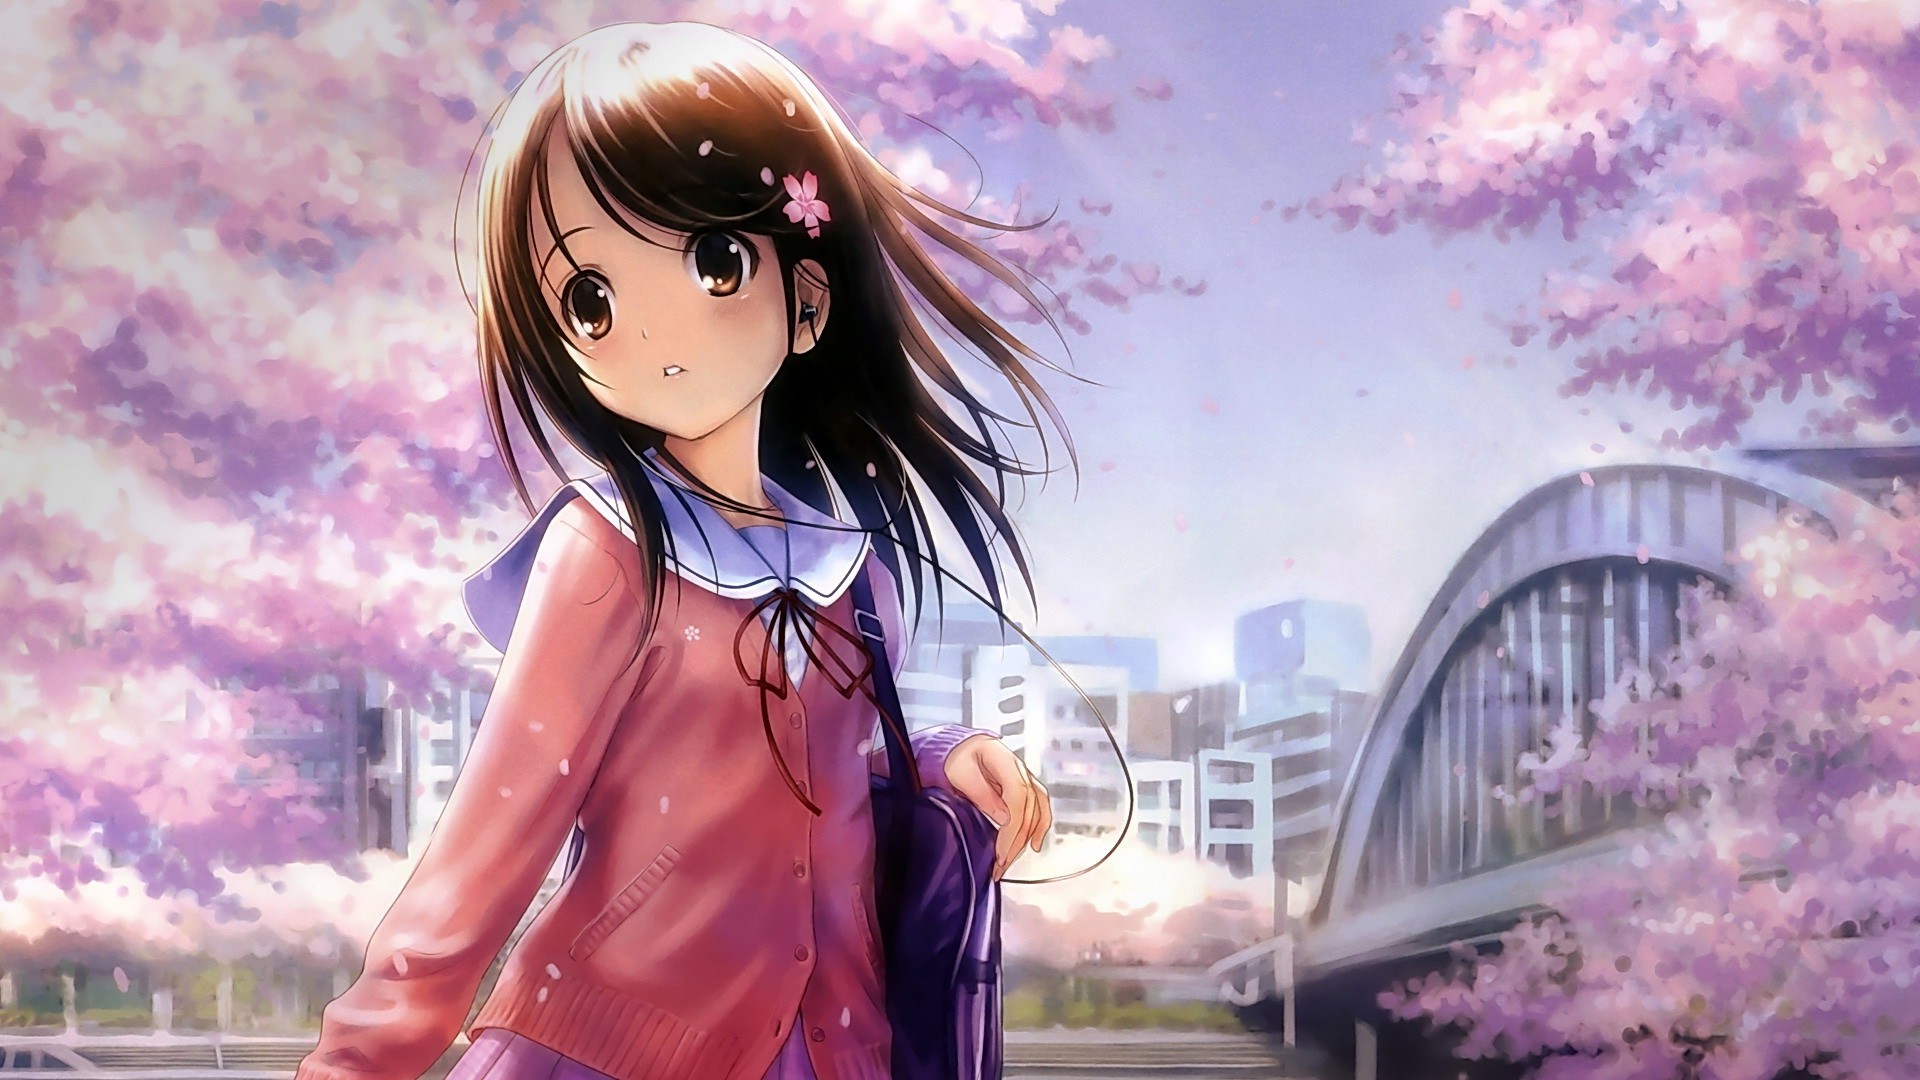 Cute Anime wallpaper HD ·① Download free stunning High Resolution wallpapers for desktop 